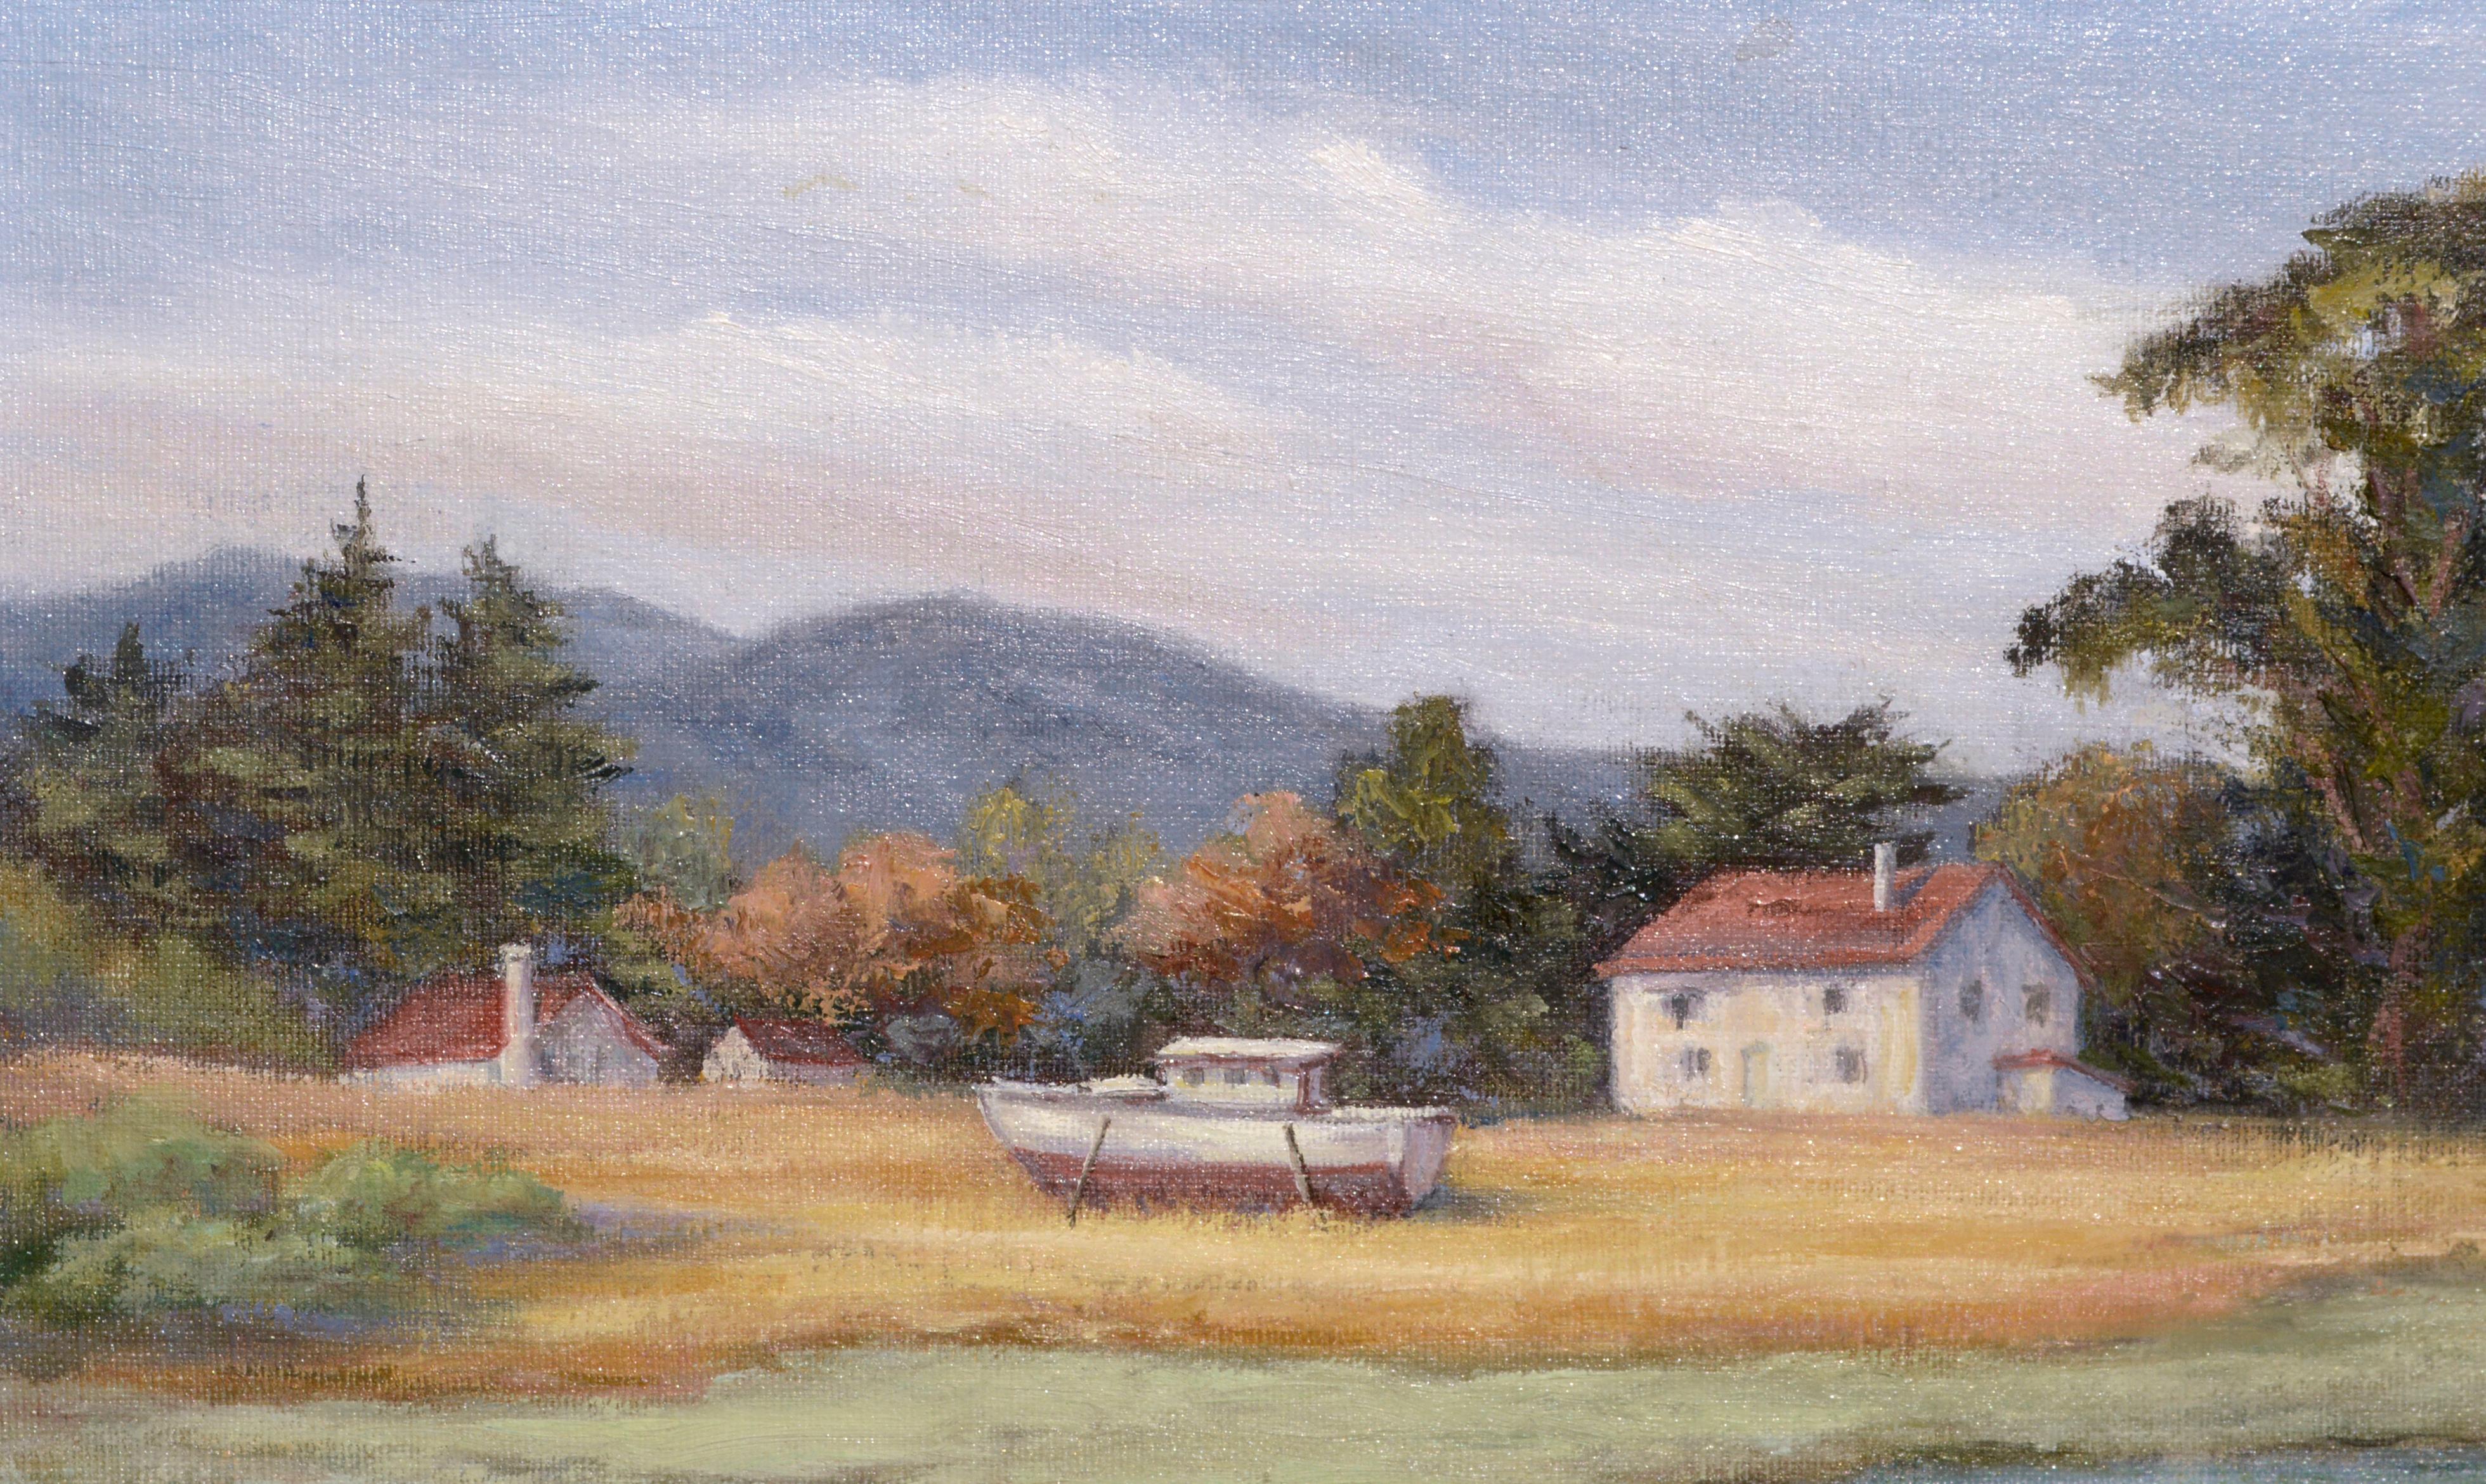 House and Boat by the Pond - Landscape - Painting by Virginia DeFreitas